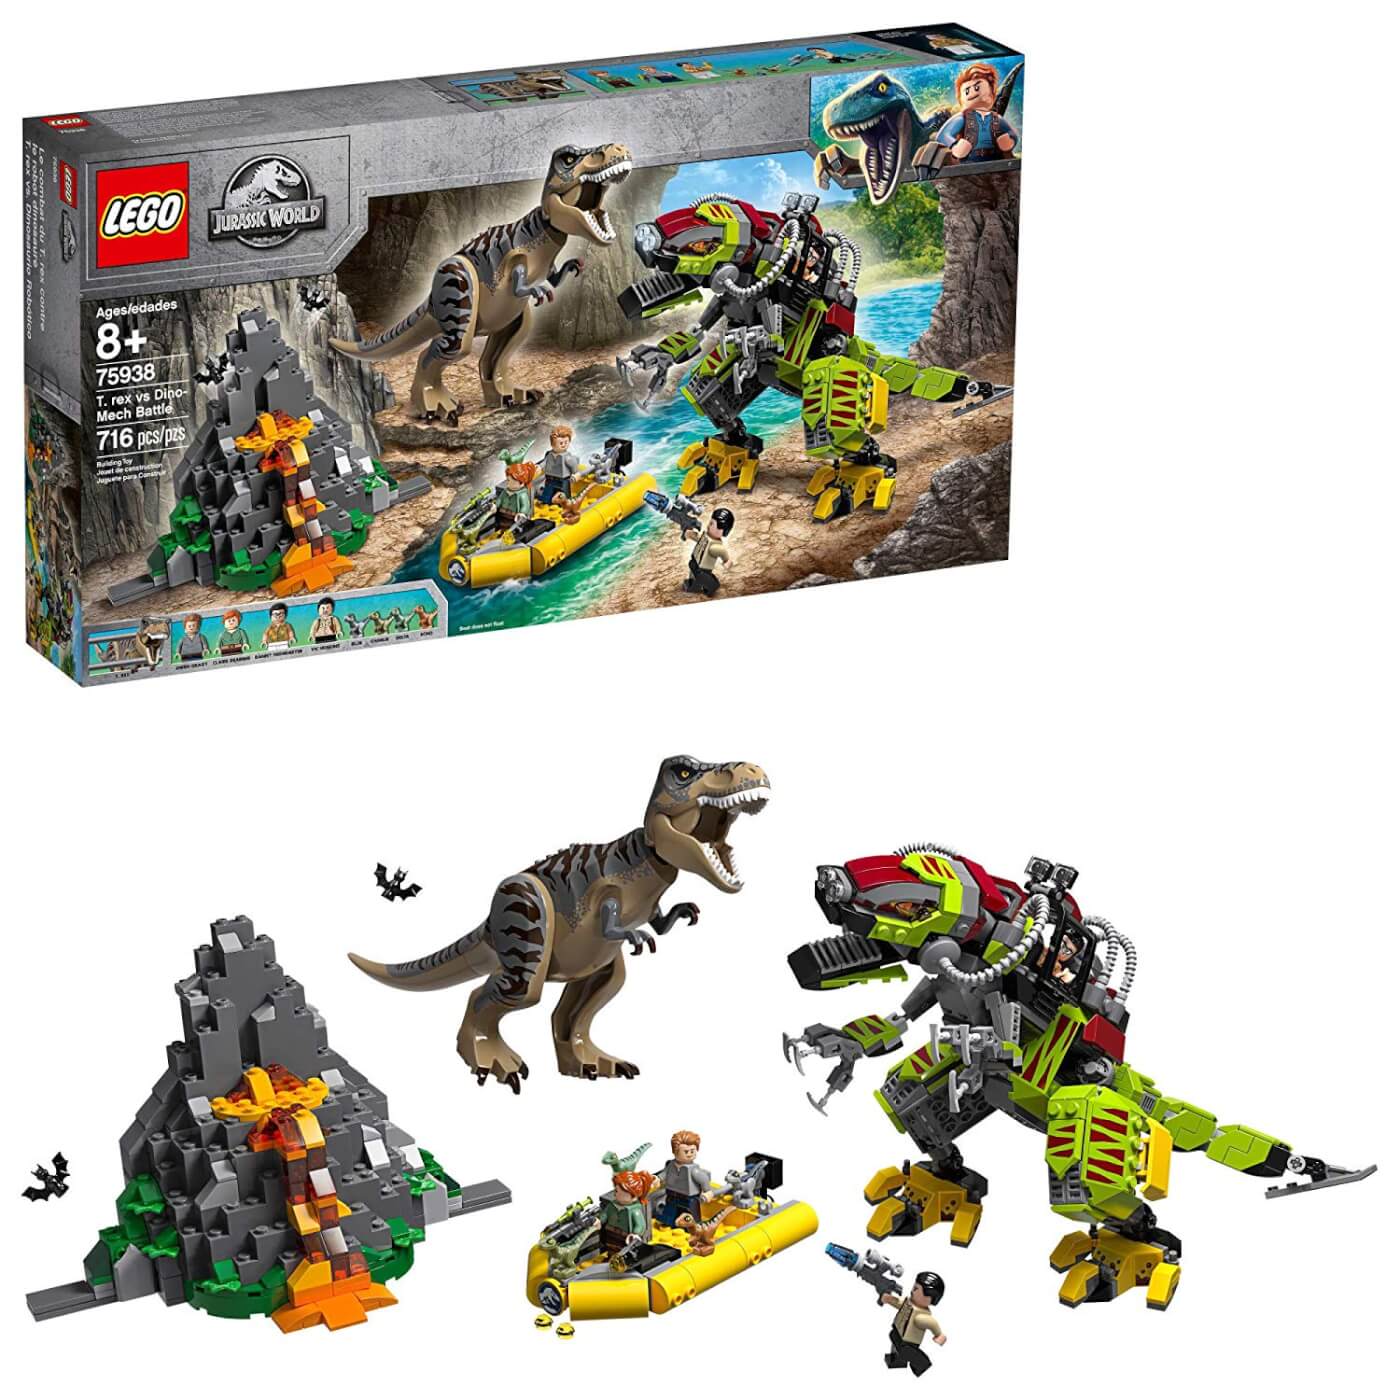 New 2019 Lego Jurassic World Sets Now Available in Stores and Online!